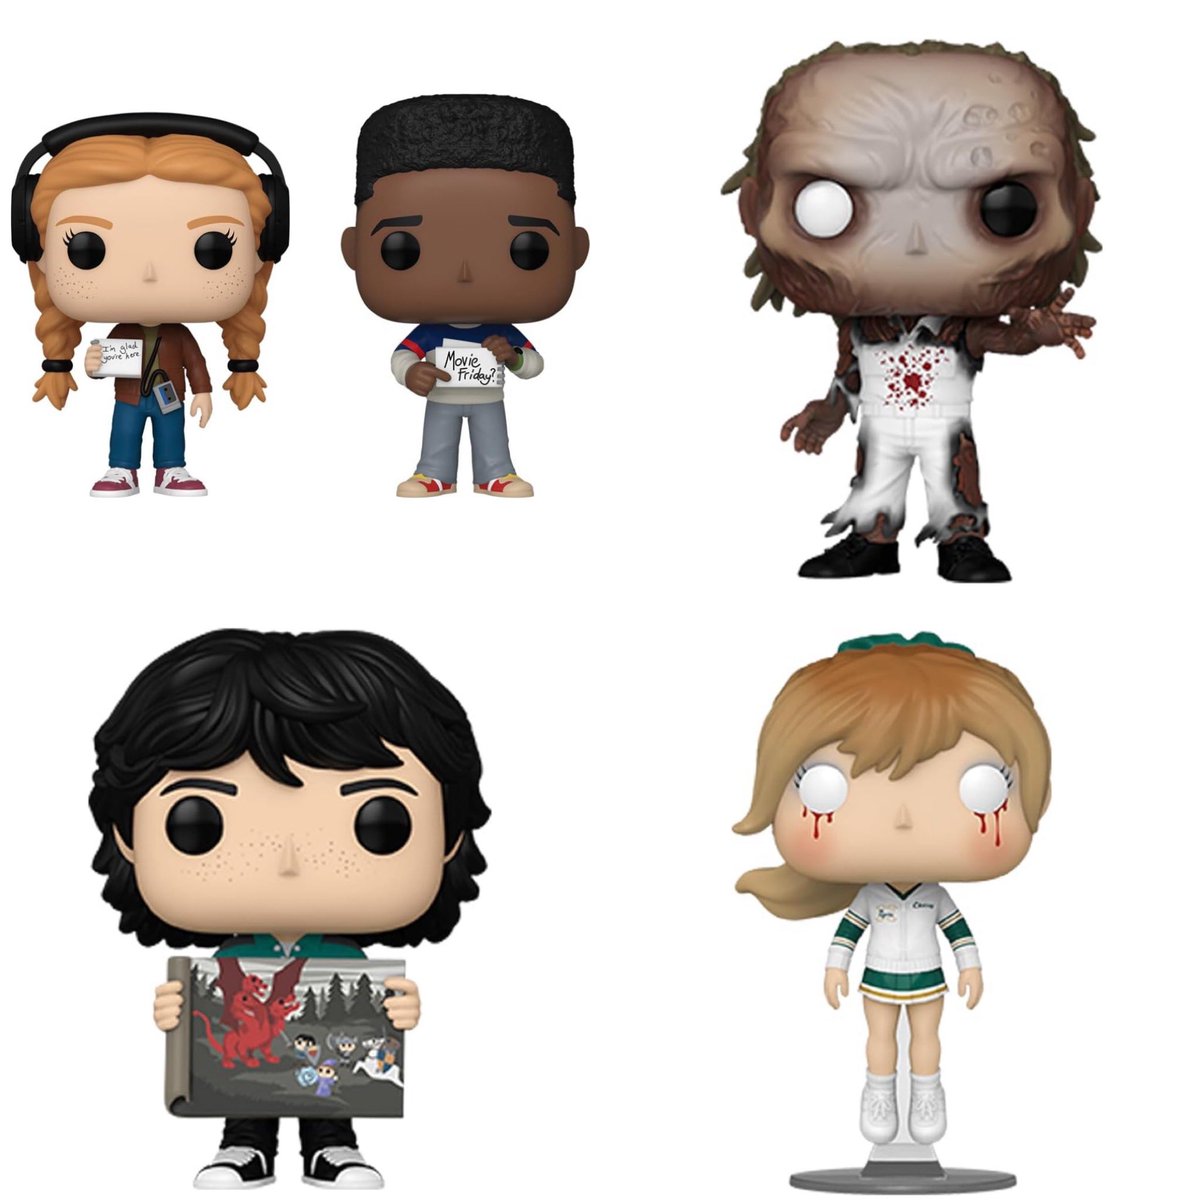 Now live! The new Stranger Things Funko POPs! Are at Amazon below! Murray’s delayed for now ~
Linky ~ amzn.to/3WHhmWp
#Ad #StrangerThings #FPN #FunkoPOPNews #Funko #POP #POPVinyl #FunkoPOP #FunkoSoda